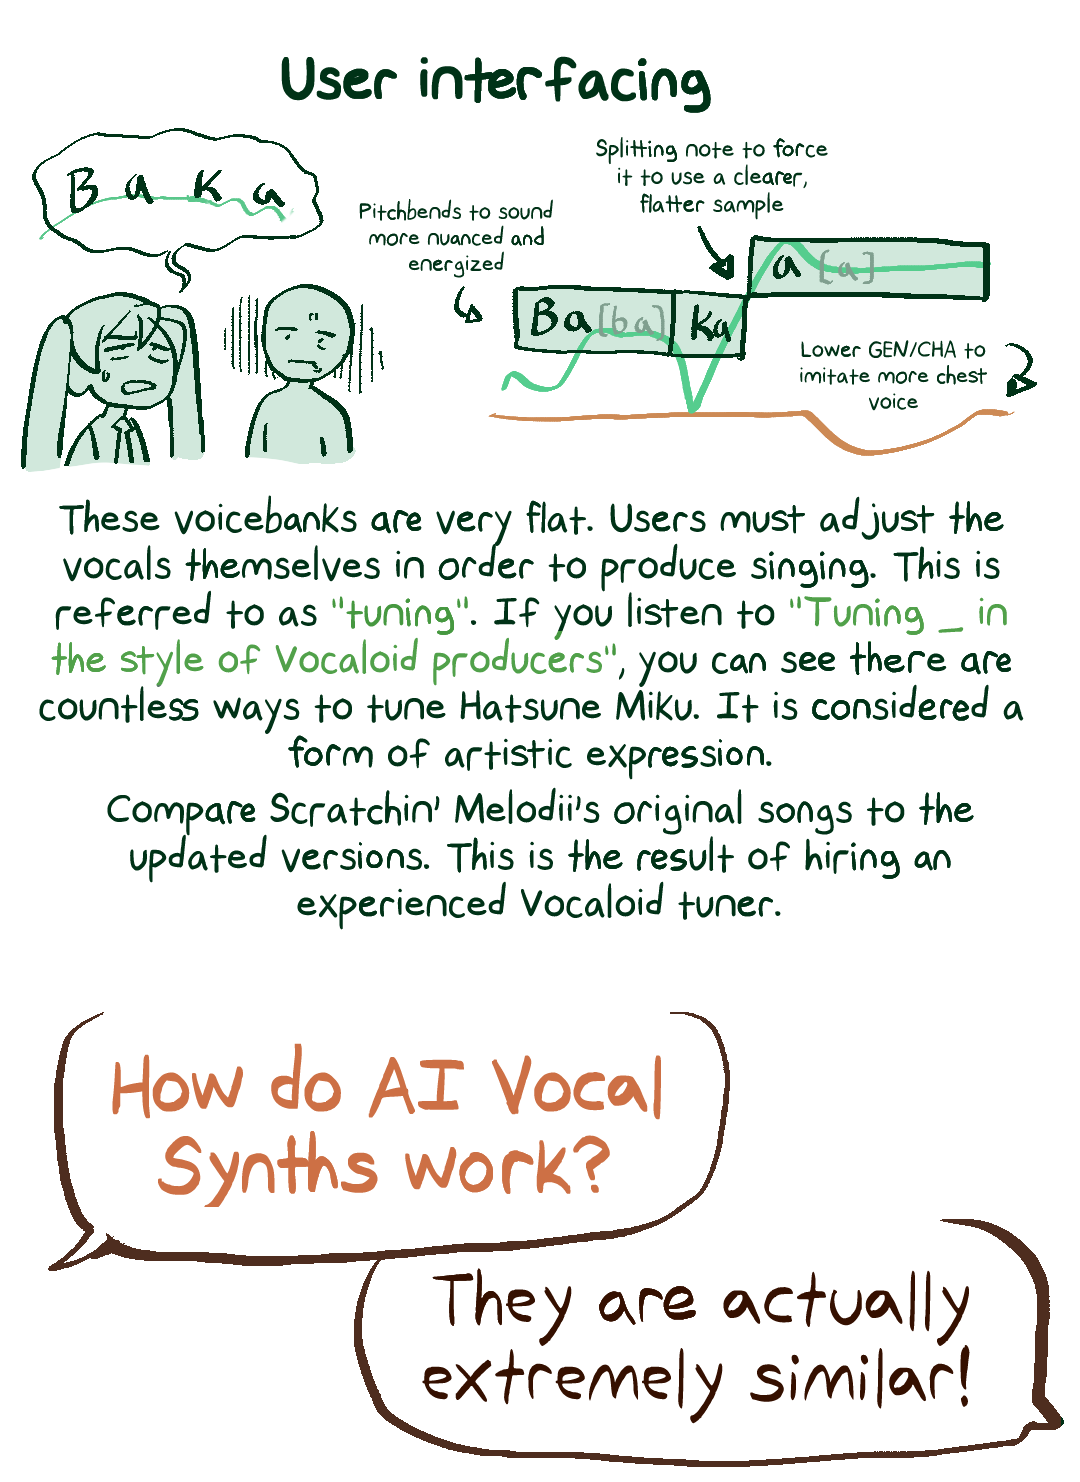 Section: User interfacing. These voicebanks are very flat. Users must adjust the vocals themselves in order to produce singing. This is referred to as "tuning". If you listen to "Tuning BLANK in the style of Vocaloid producers", you can see there are countless ways to tune Hatsune Miku. It is considered a form of artistic expression.  Compare Scratchin' Melodii's original songs to the updated versions. This is the result of hiring an experienced Vocaloid tuner. Question: How do AI Vocal Synths work? Answer: They are actually extremely similar!